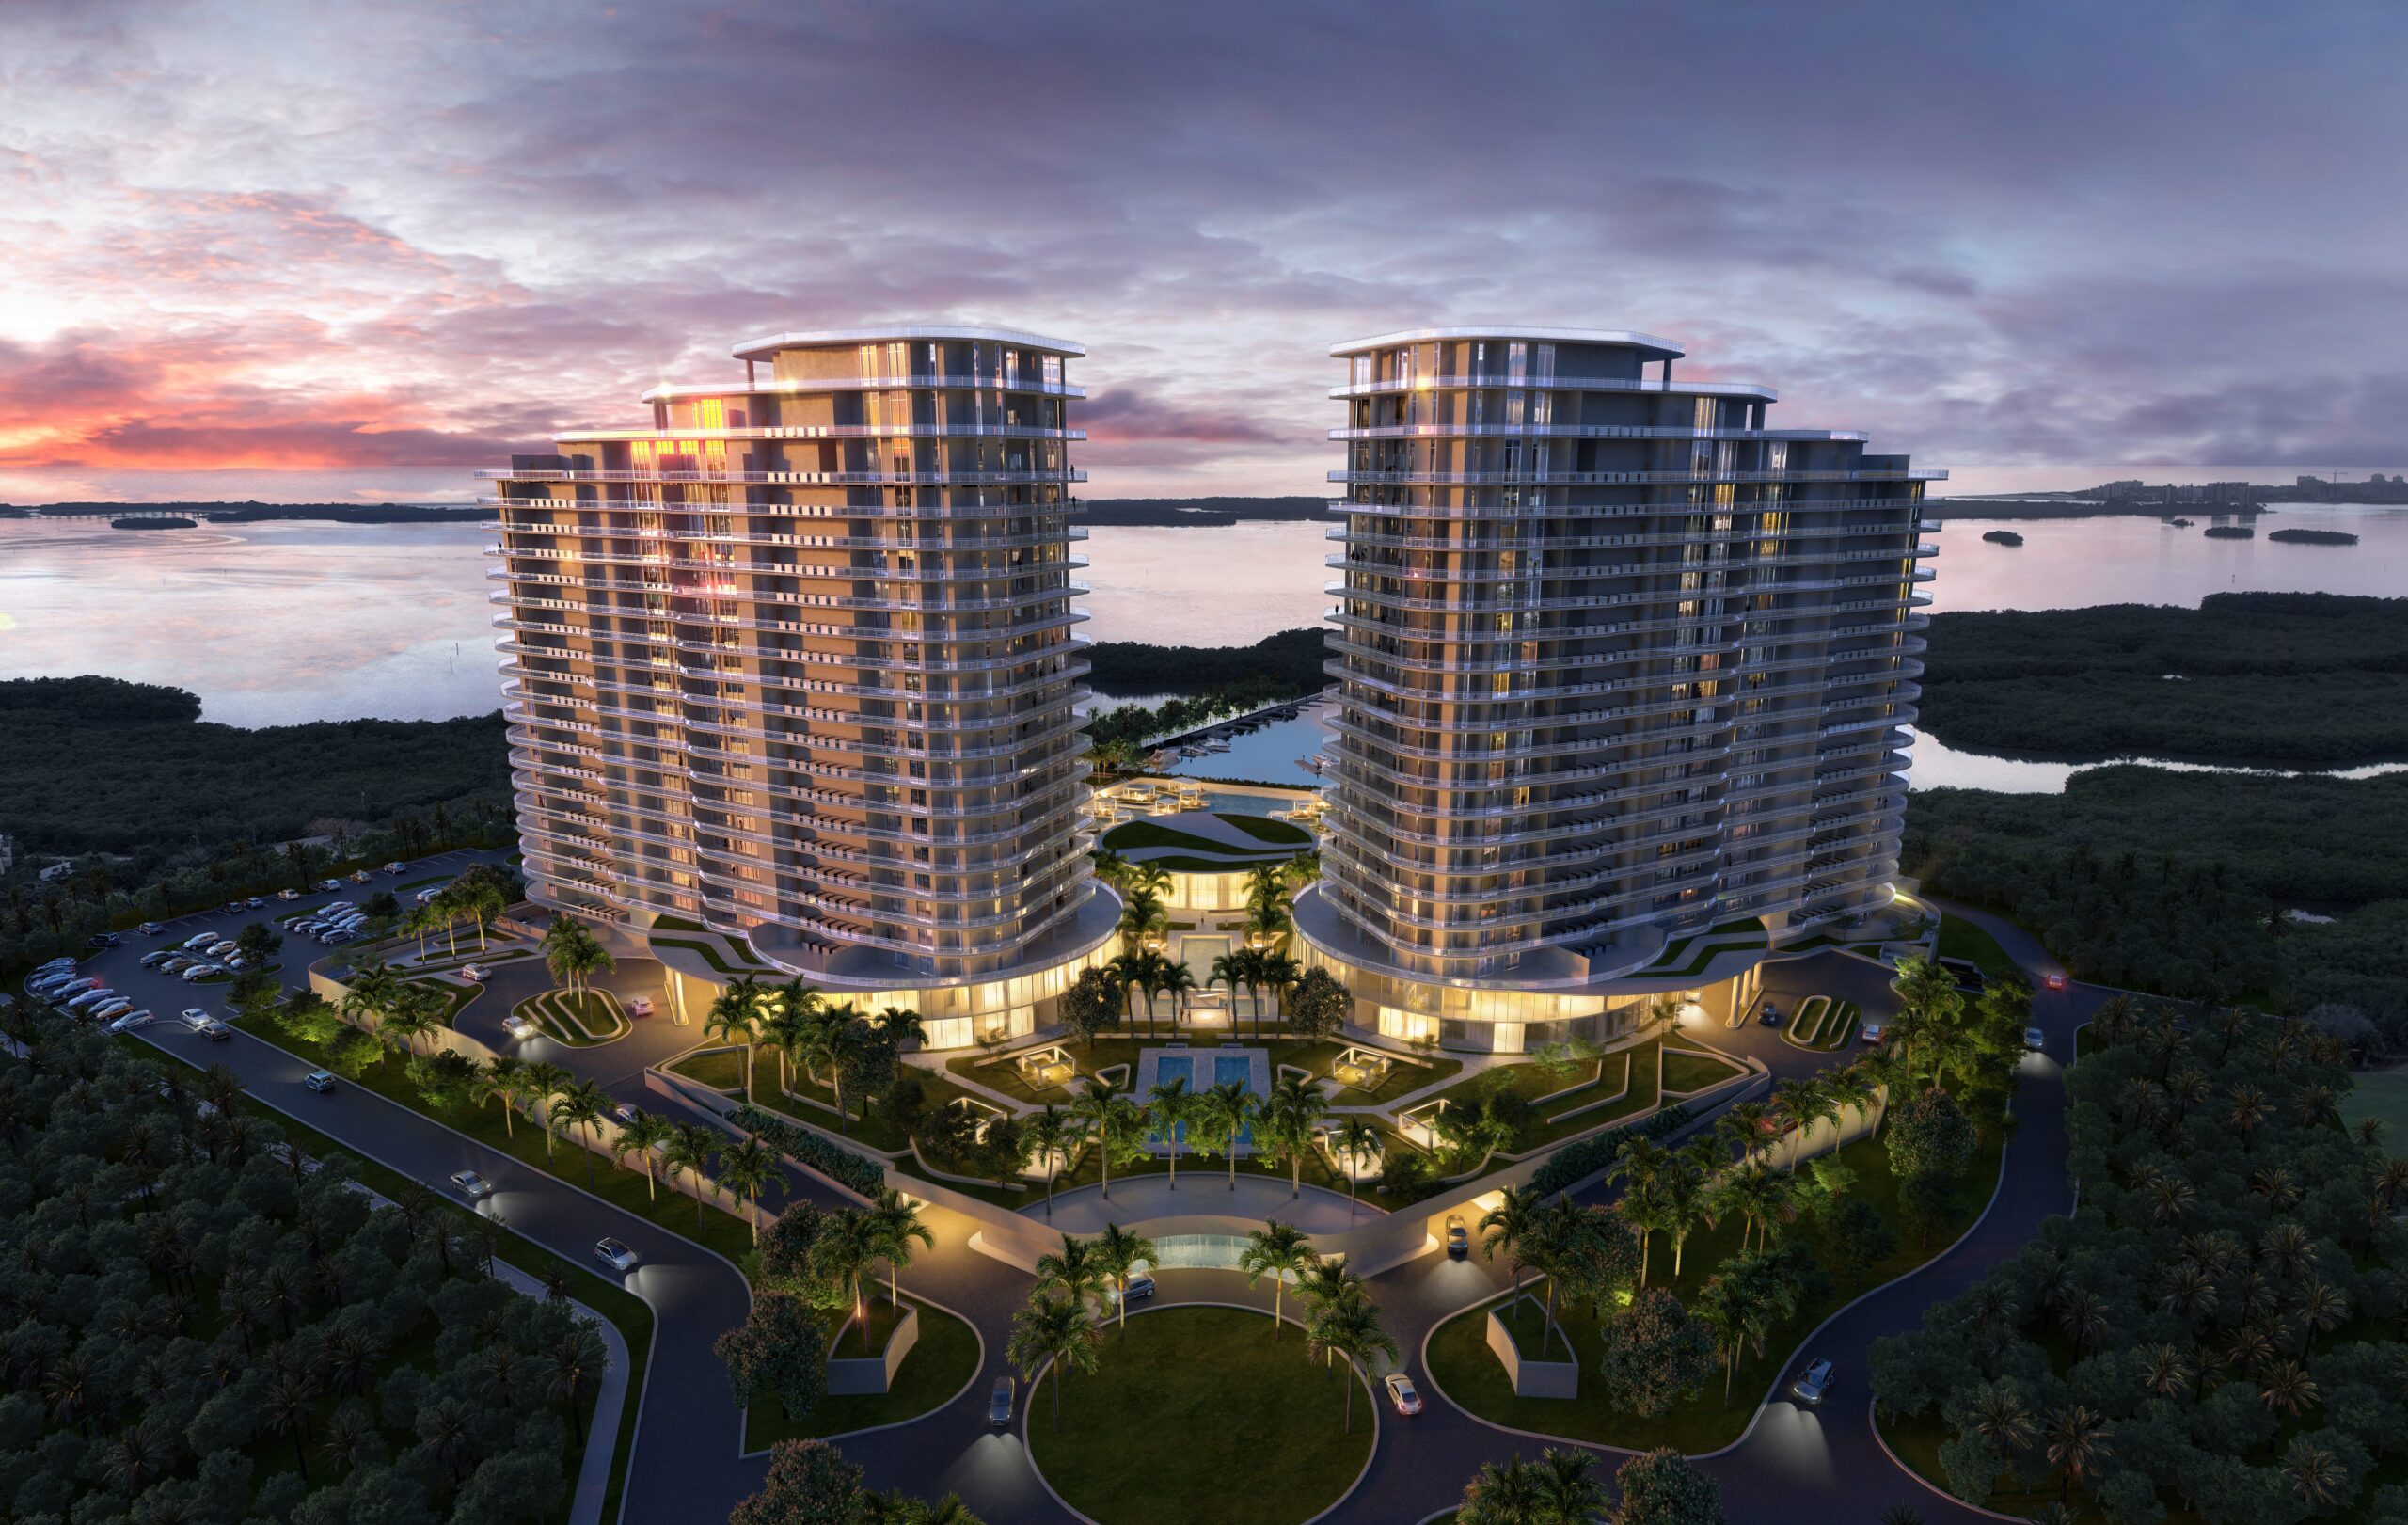 The Ritz-Carlton Residences, Estero Bay entryway experience where two towers frame the bay in the background